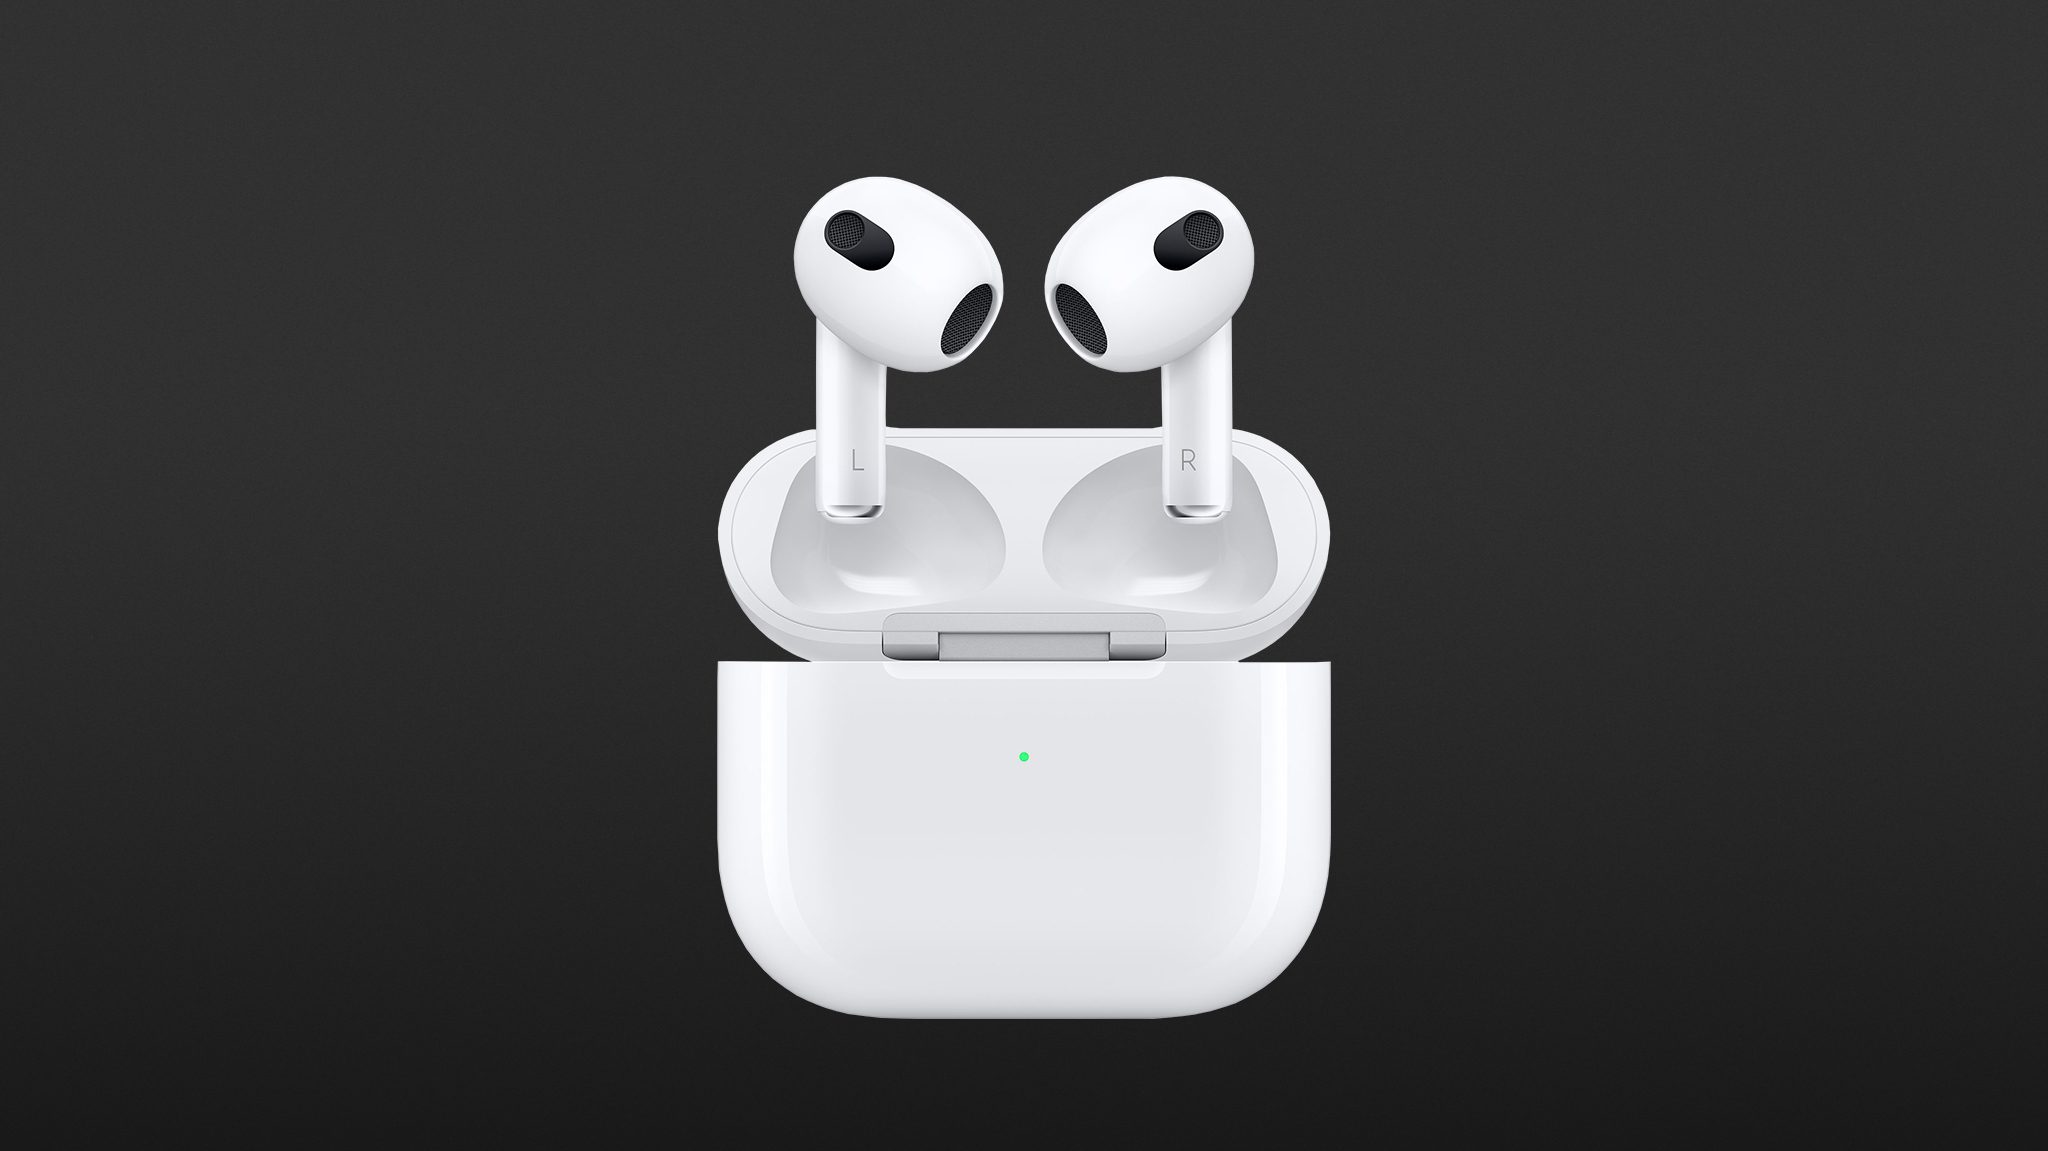 AirPods 3 review: Perfect balance of audio quality and features